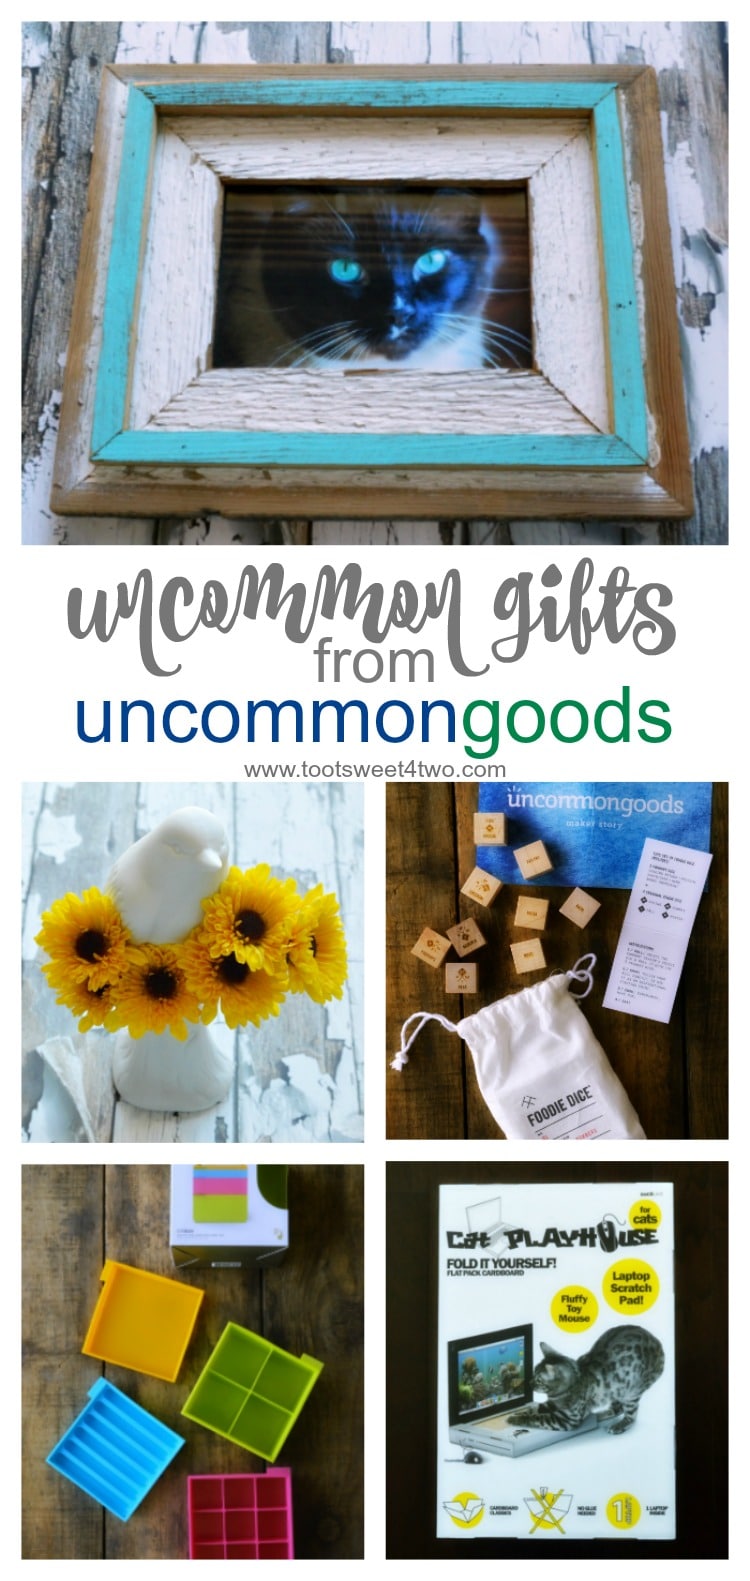 What defines gifts as uncommon goods? Words that come to mind are unique, creative, extraordinary, surprising, exceptional, singular. How do you find the perfect birthday present for the person who has everything? If you are looking for unique gifts, unusual gifts or uncommon gifts for a variety of reasons, UncommonGoods is a resource not to miss. Looking for gifts for foodies? Check. Looking for Christmas present ideas for him? Check. Looking for unique corporate holiday gifts or client gifts? Check. Looking for creative gift ideas that make a statement? Check. UncommonGoods is the perfect resource for great gifts ideas solving the age old gift giving dilemma of what gift to get for any and every special occasion. | www.tootsweet4two.com